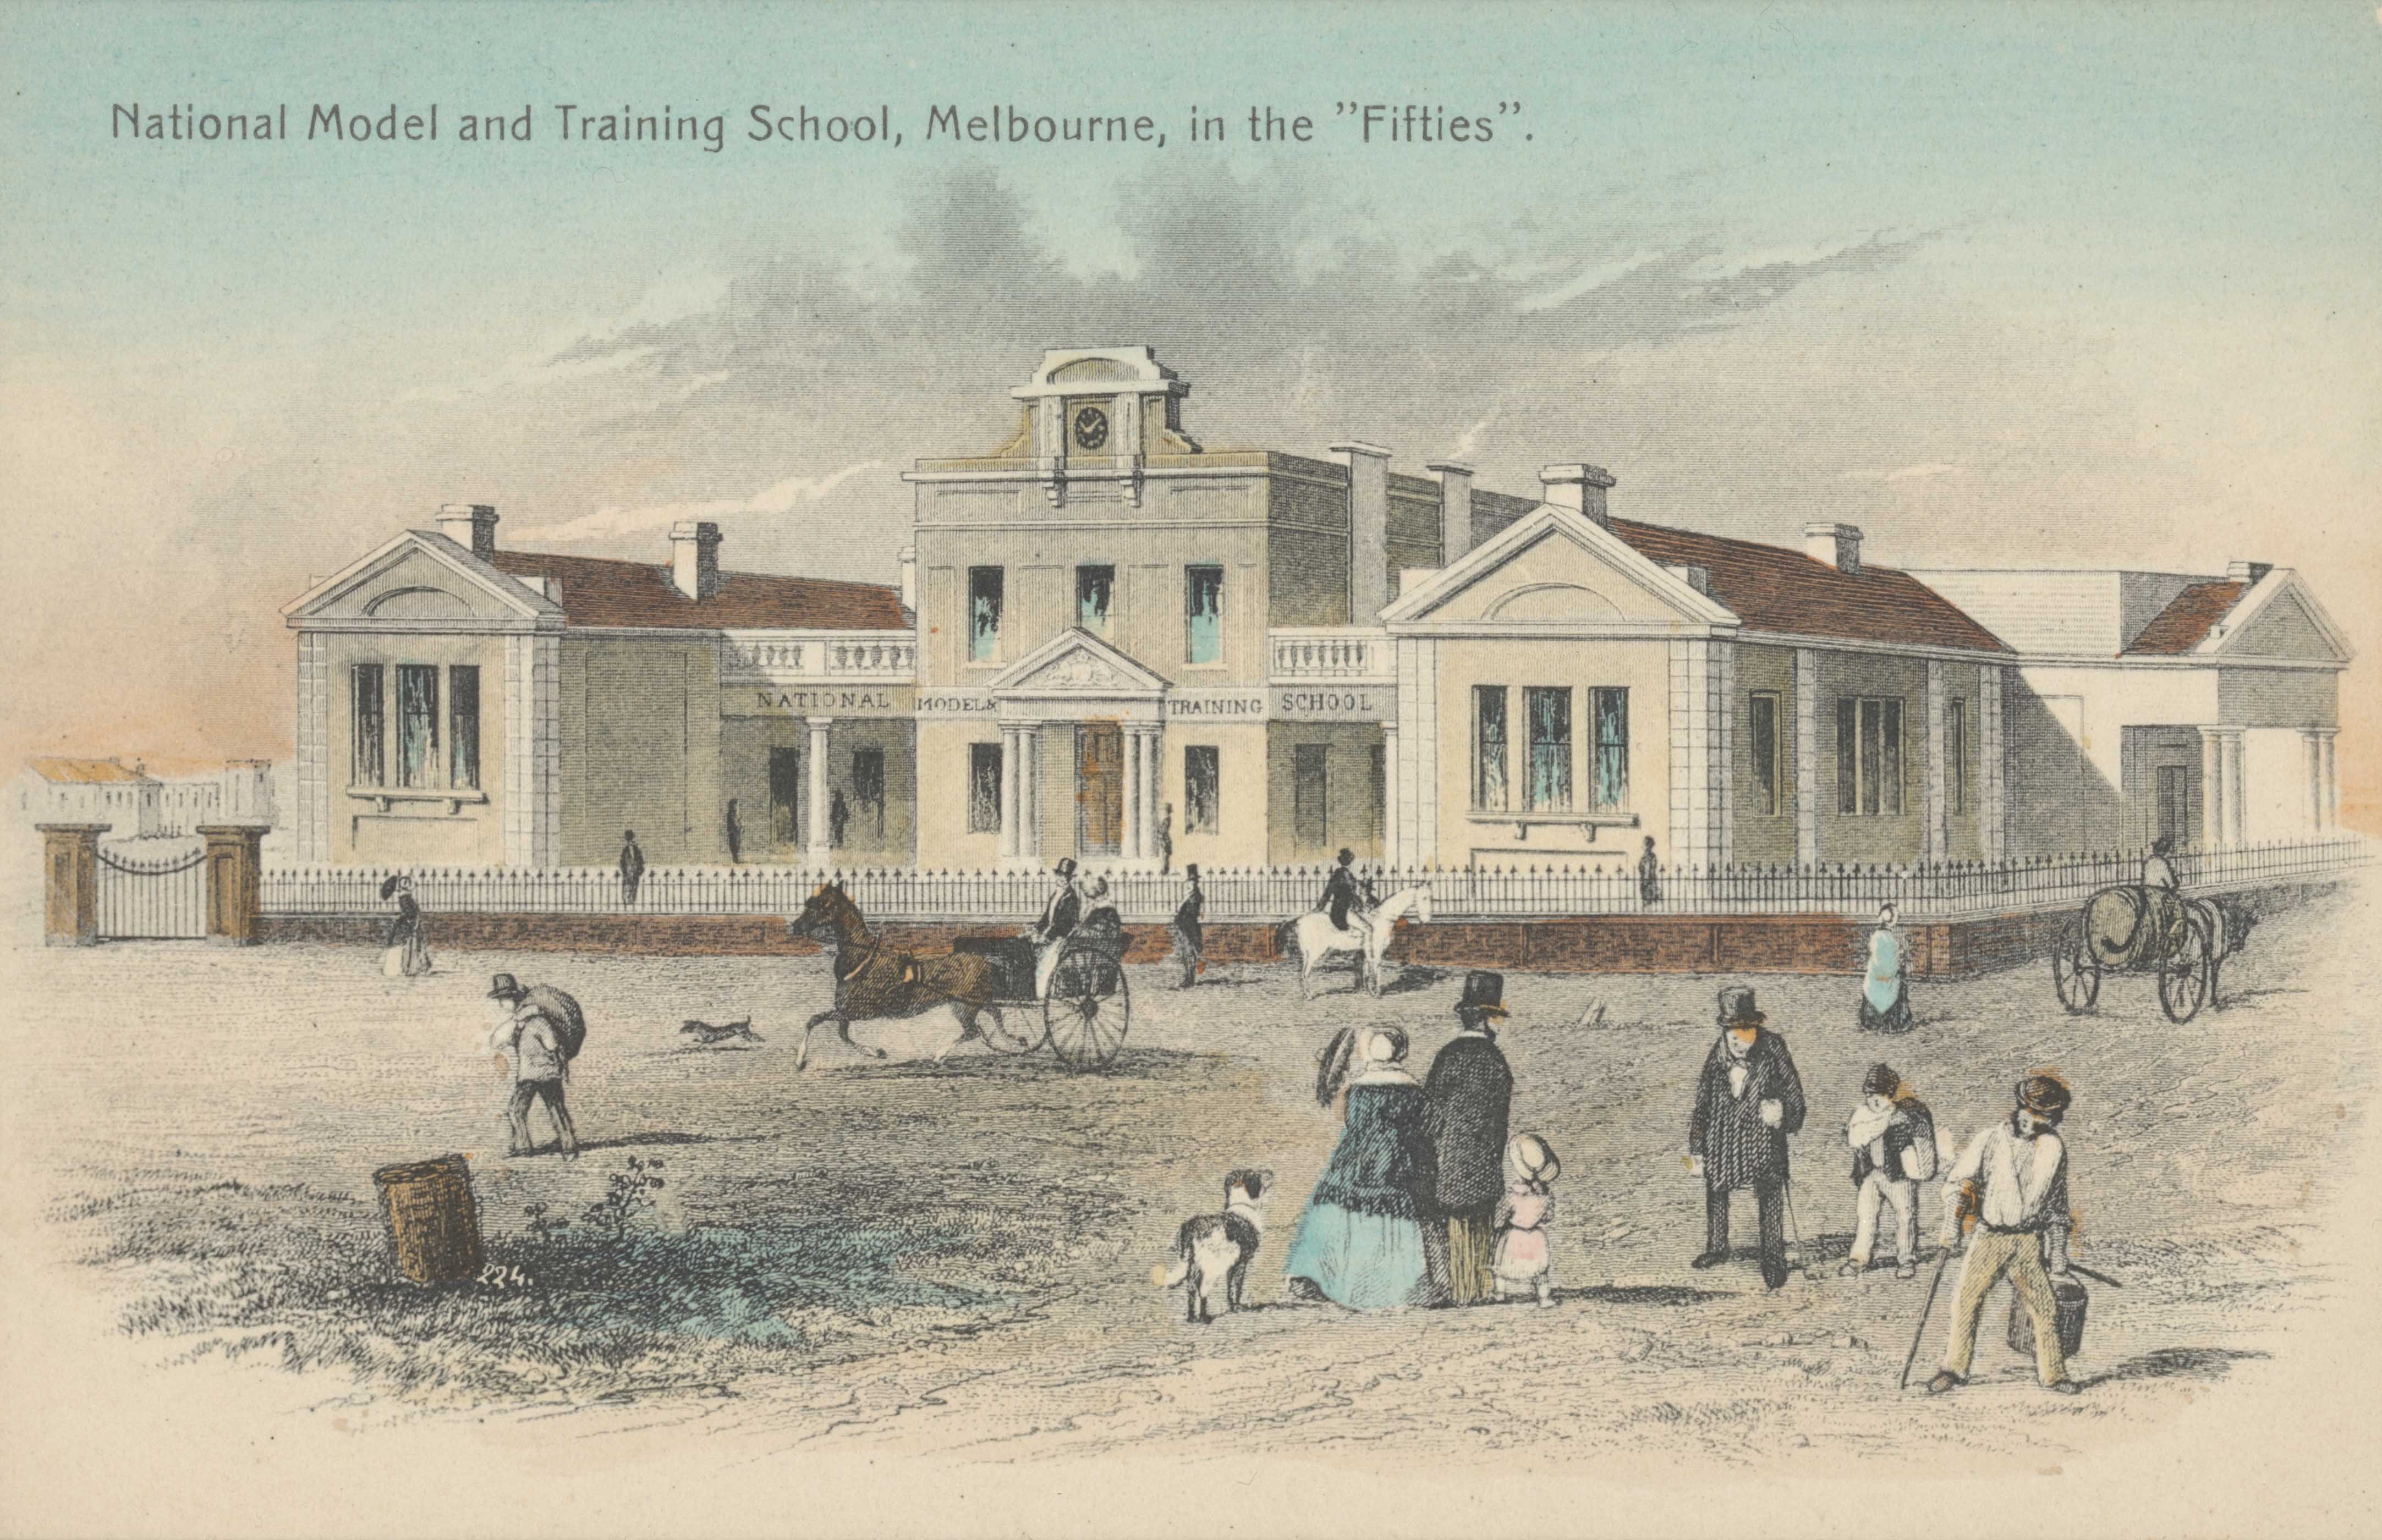 Postcard featuring a drawing of the National Model and Training School, Melbourne.